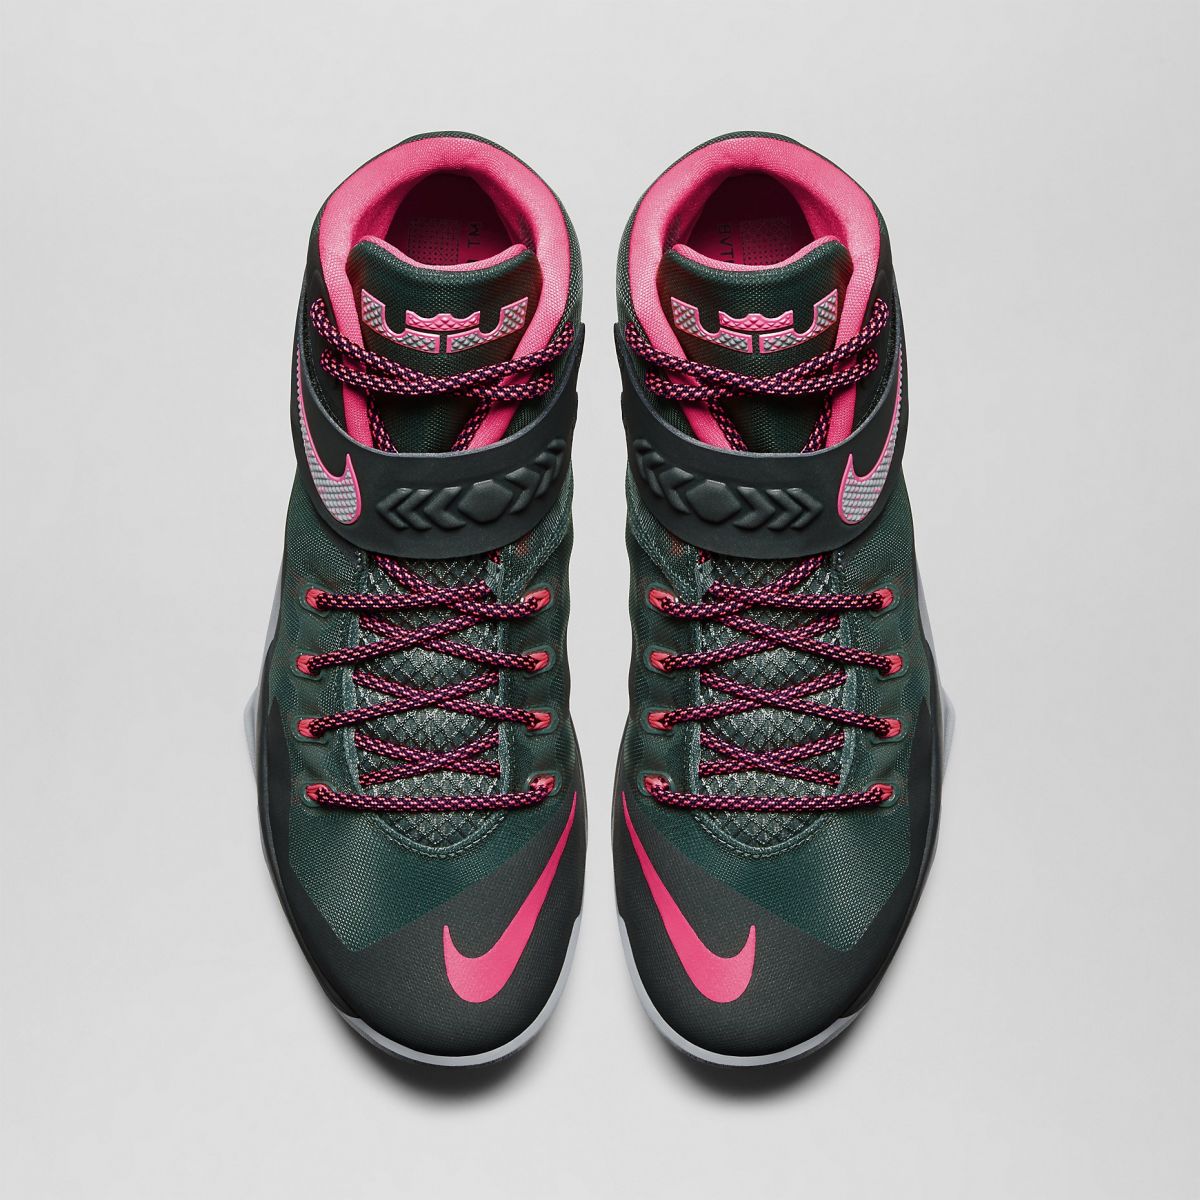 lebron soldier 8 pink and green